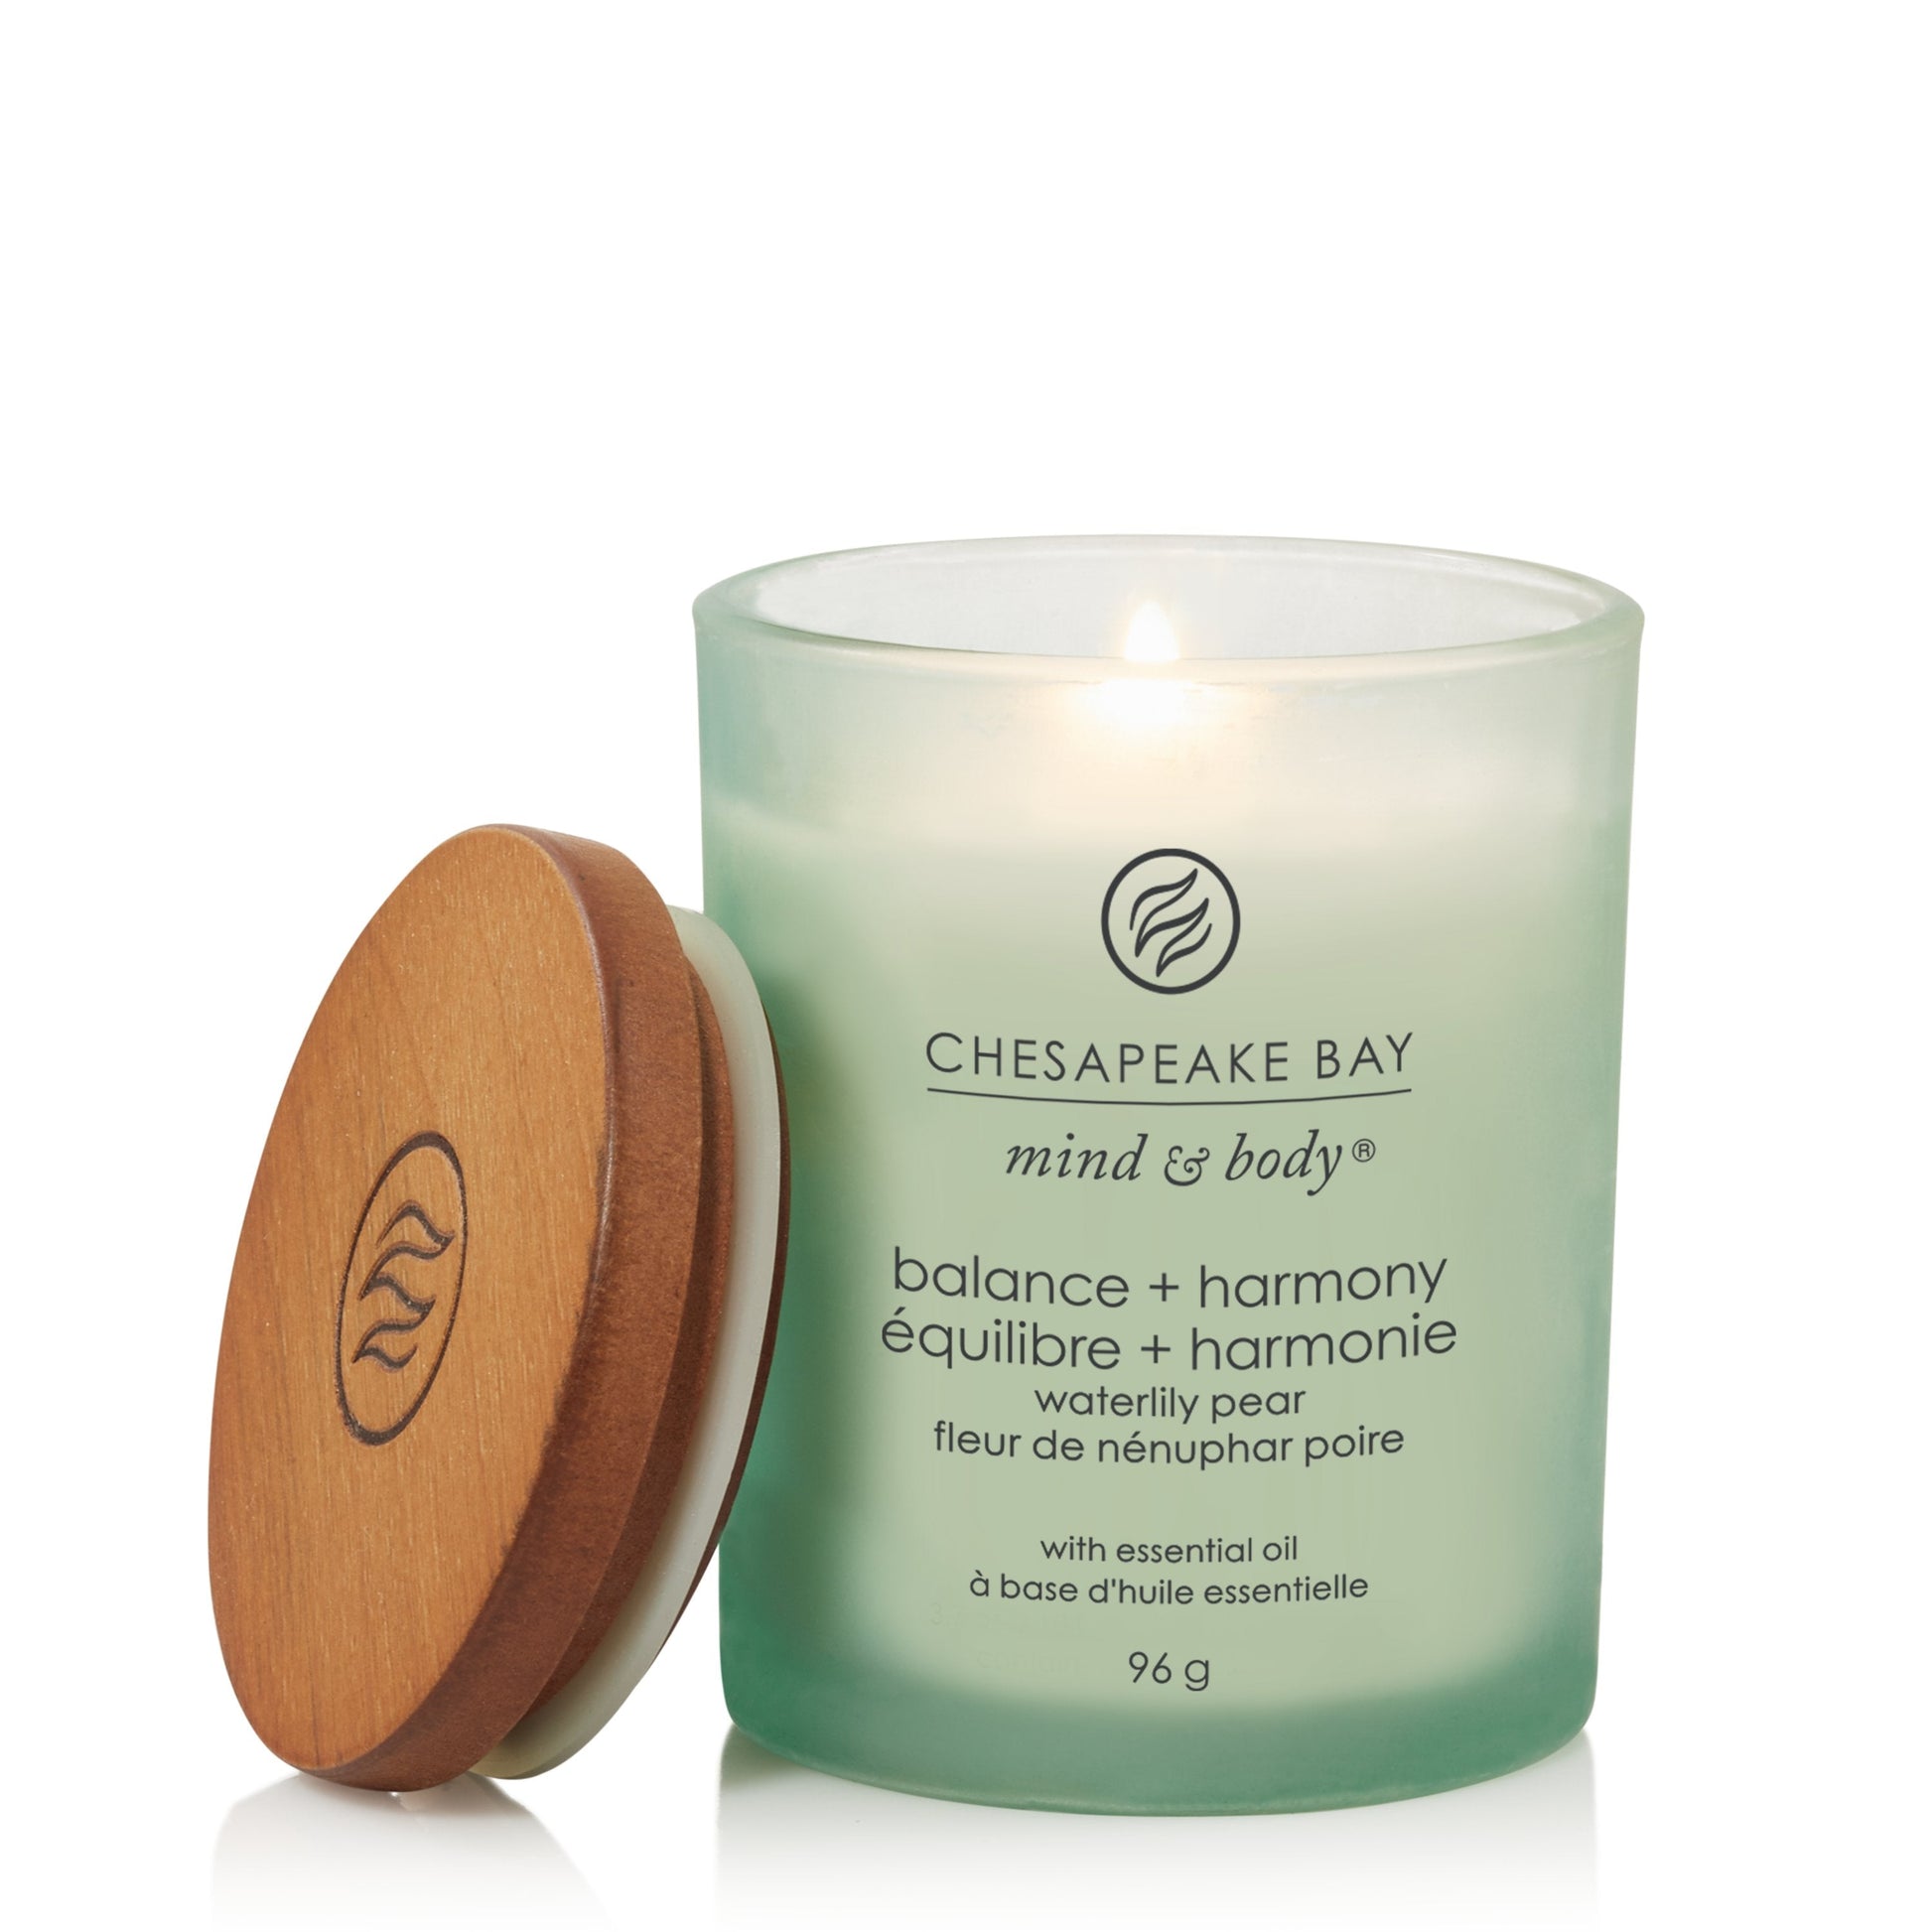 Chesapeake Bay Waterlily Pear Small Candle